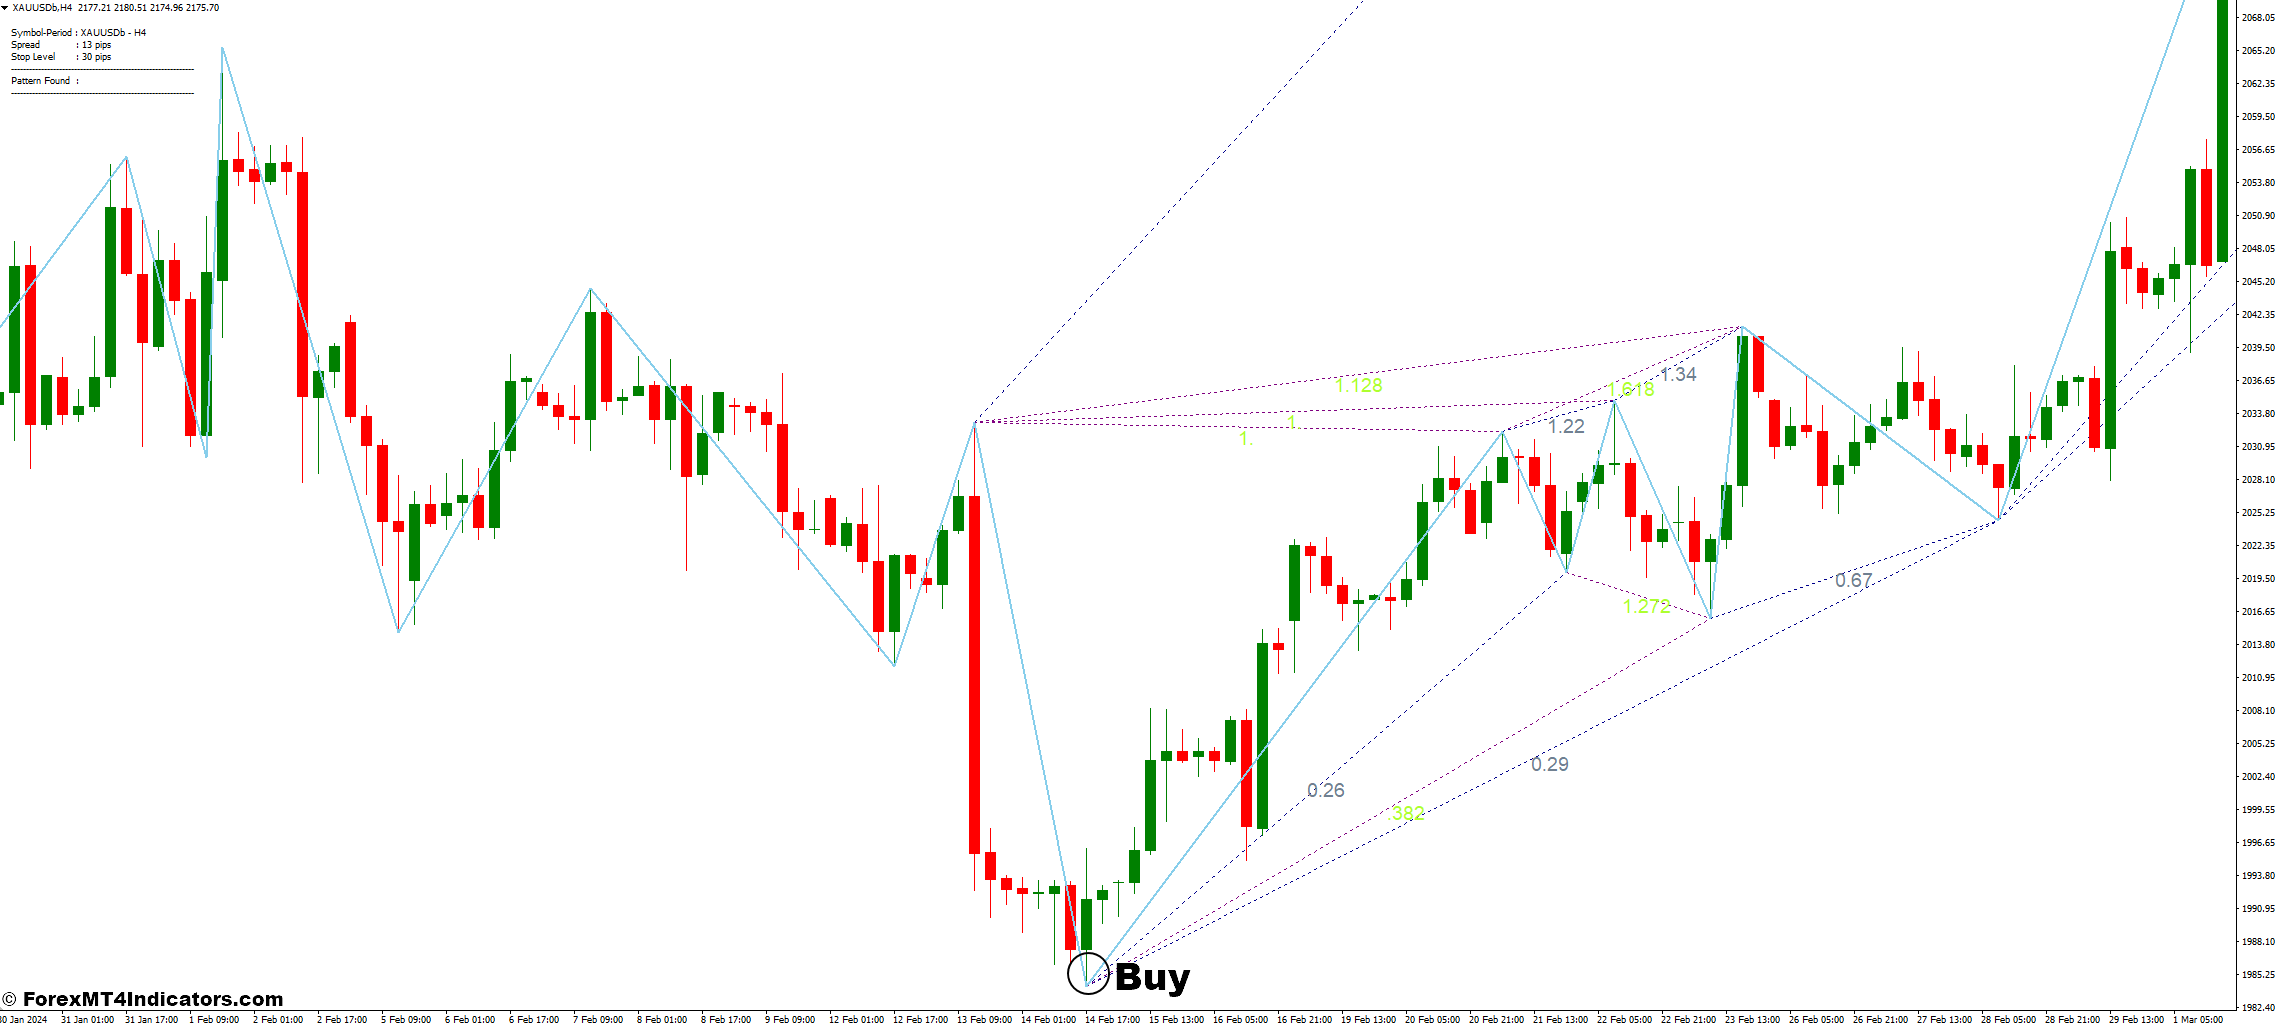 How to Trade with the Cypher Pattern Indicator - Buy Entry